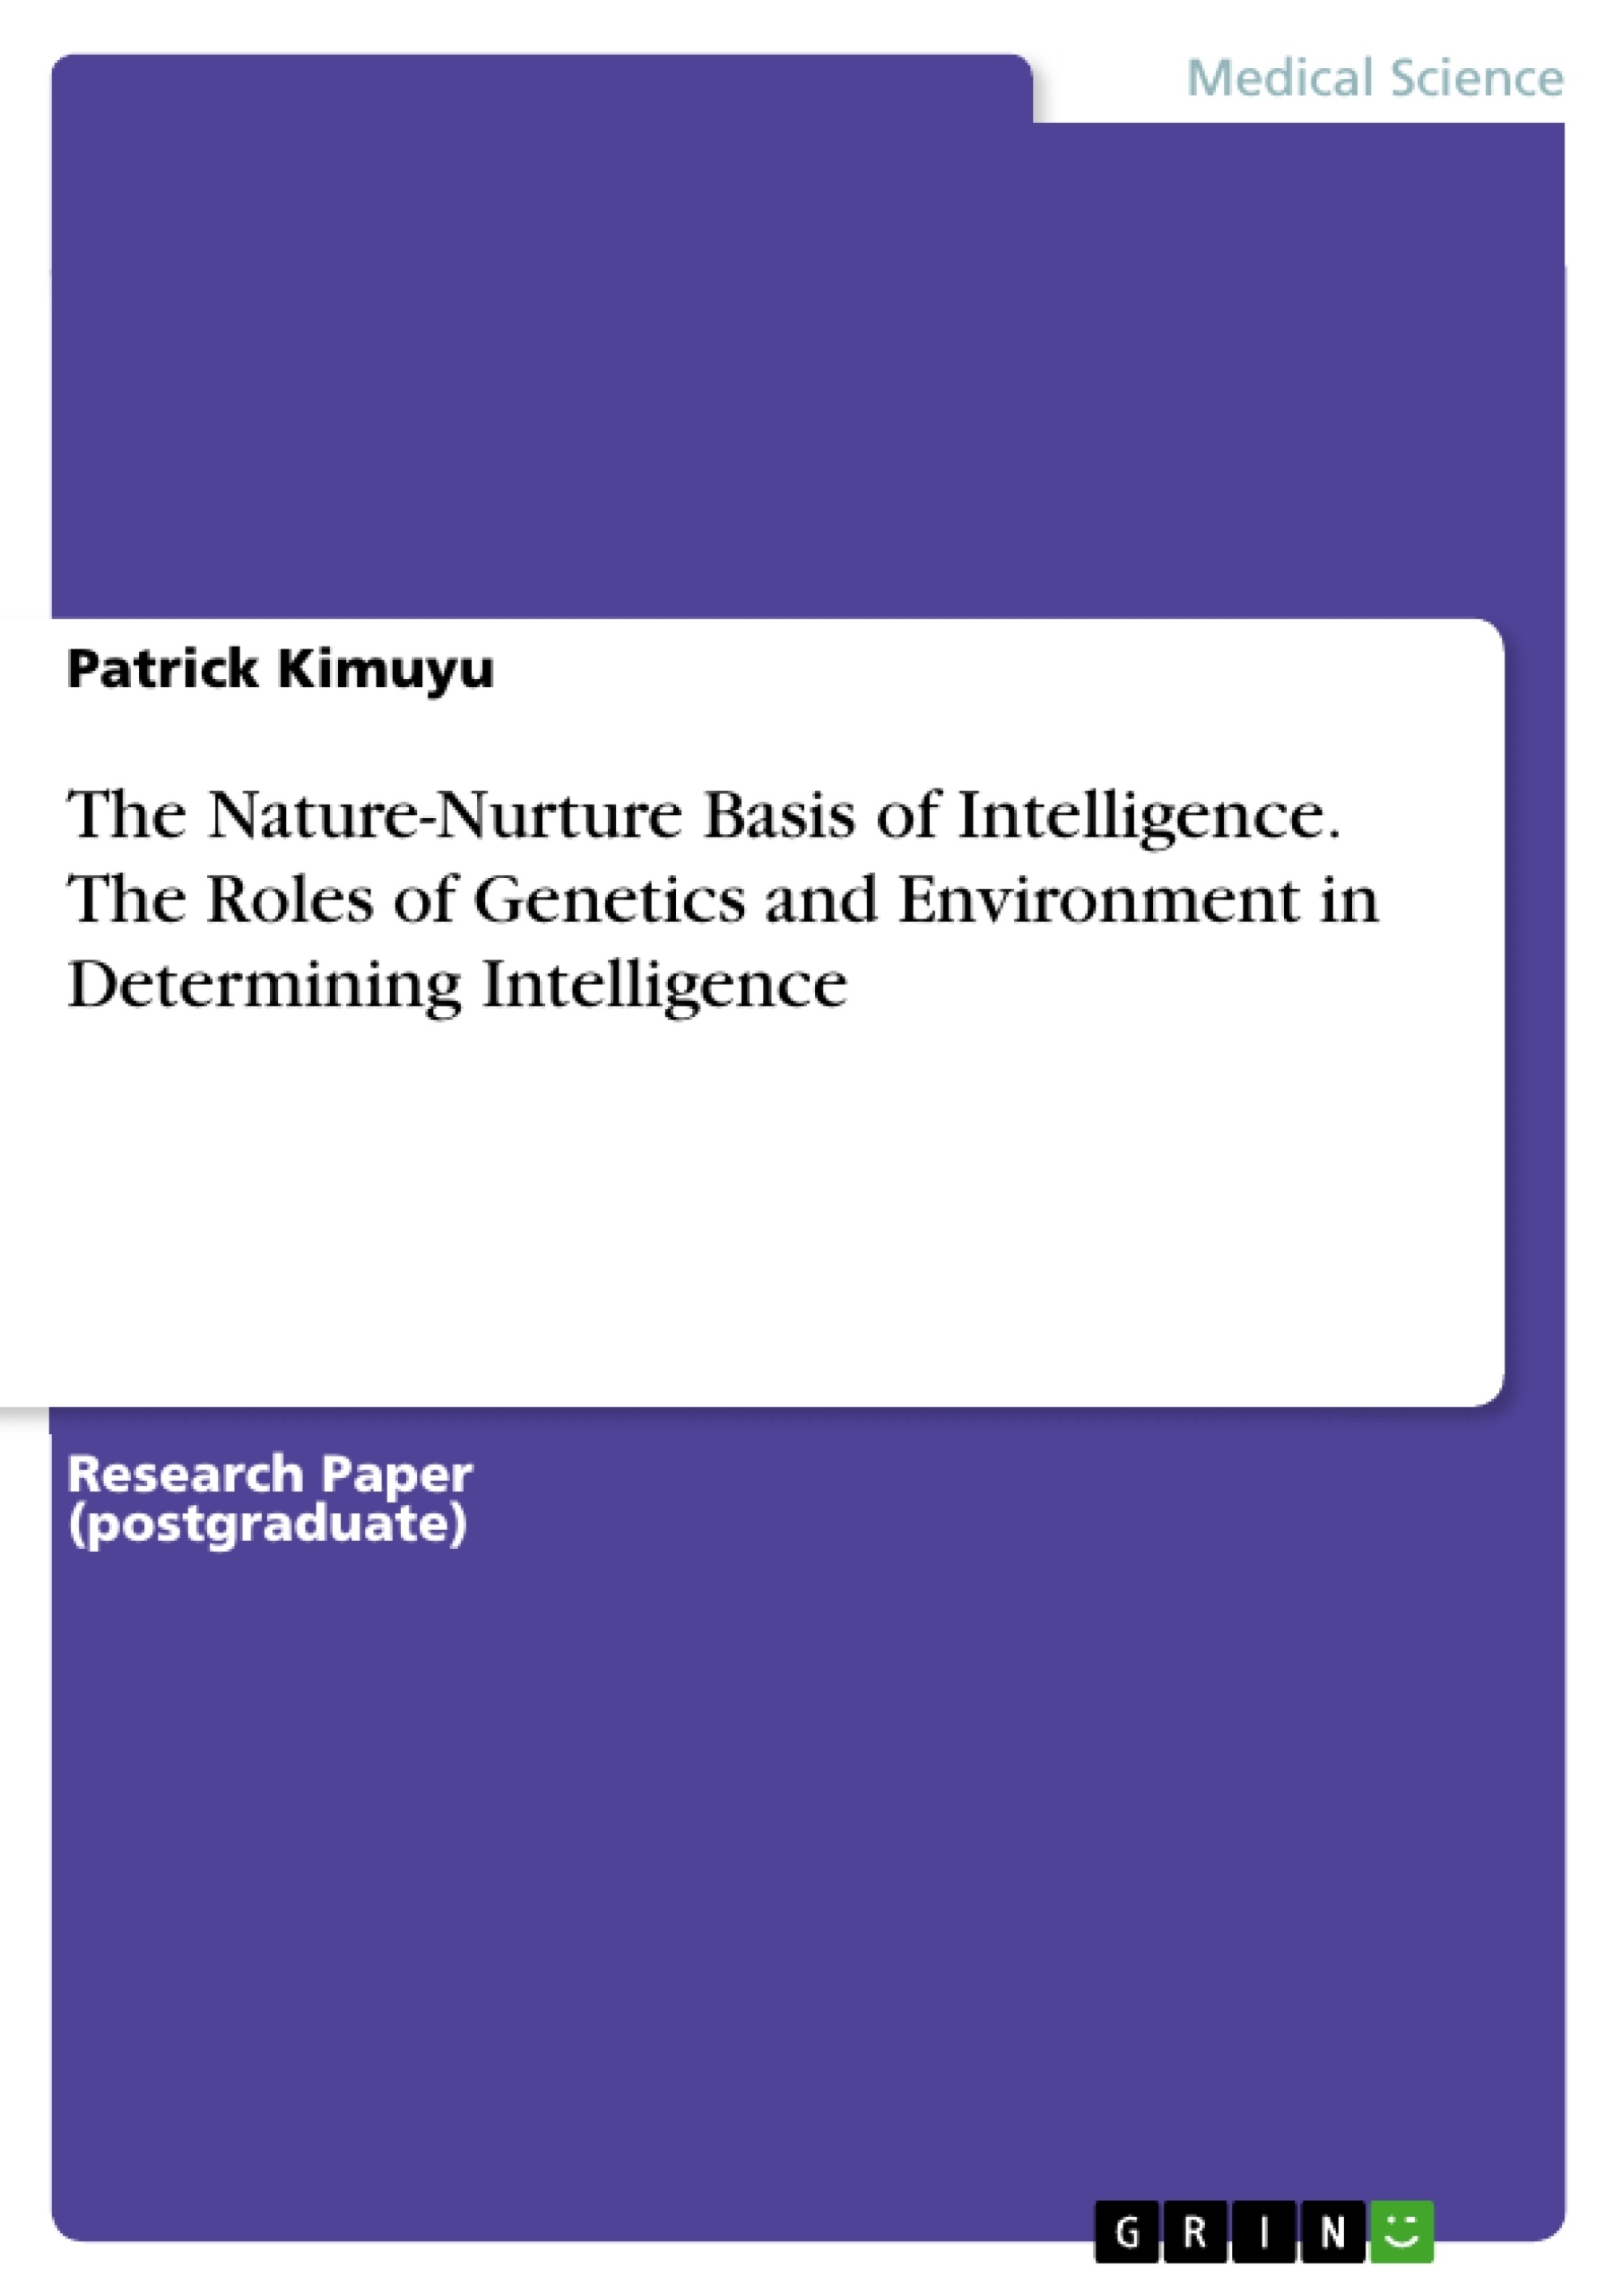 Título: The Nature-Nurture Basis of Intelligence. The Roles of Genetics and Environment in Determining Intelligence